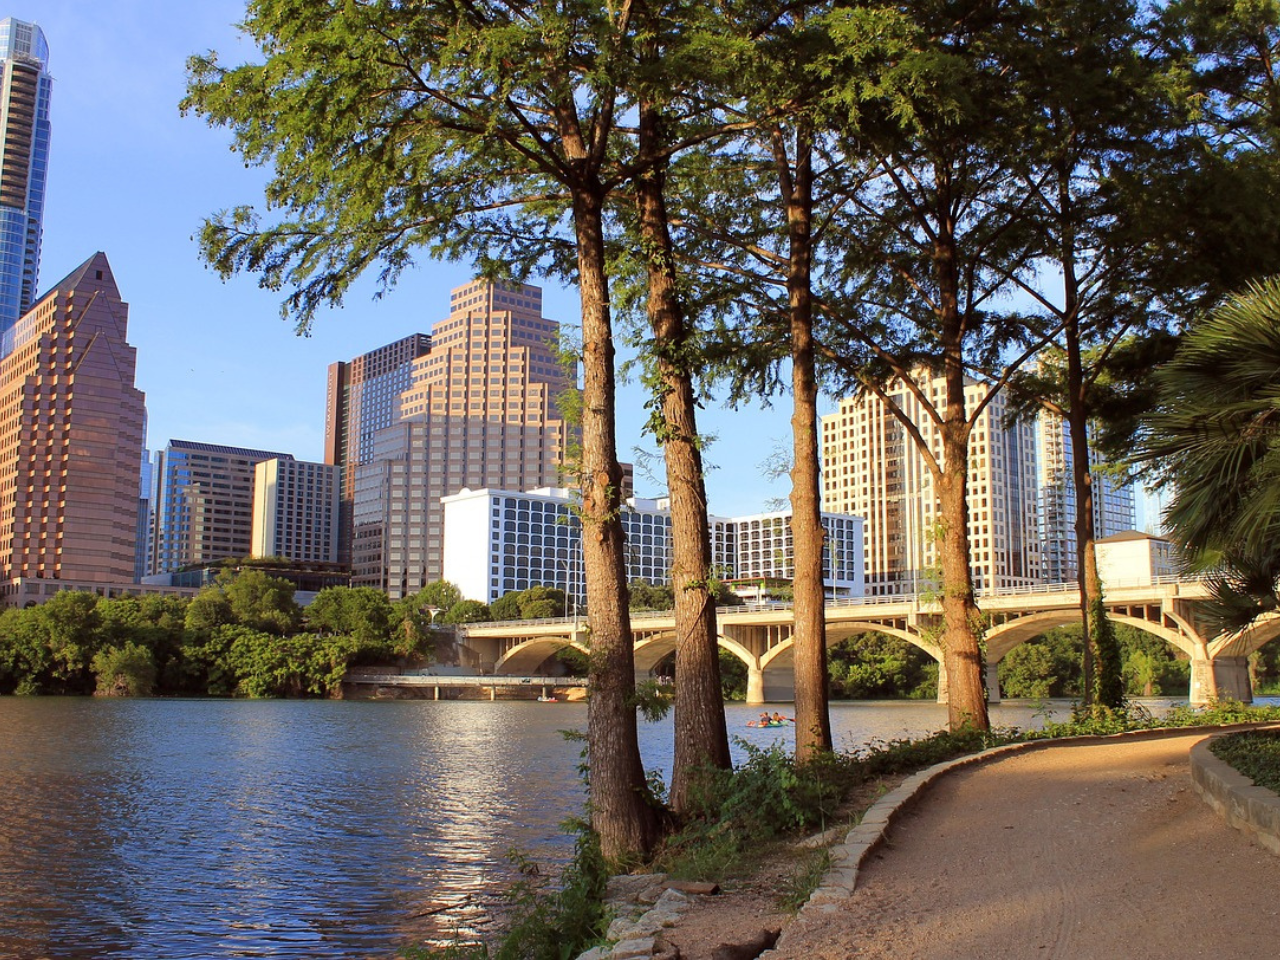 Trees next to the water and buildings in Austin.